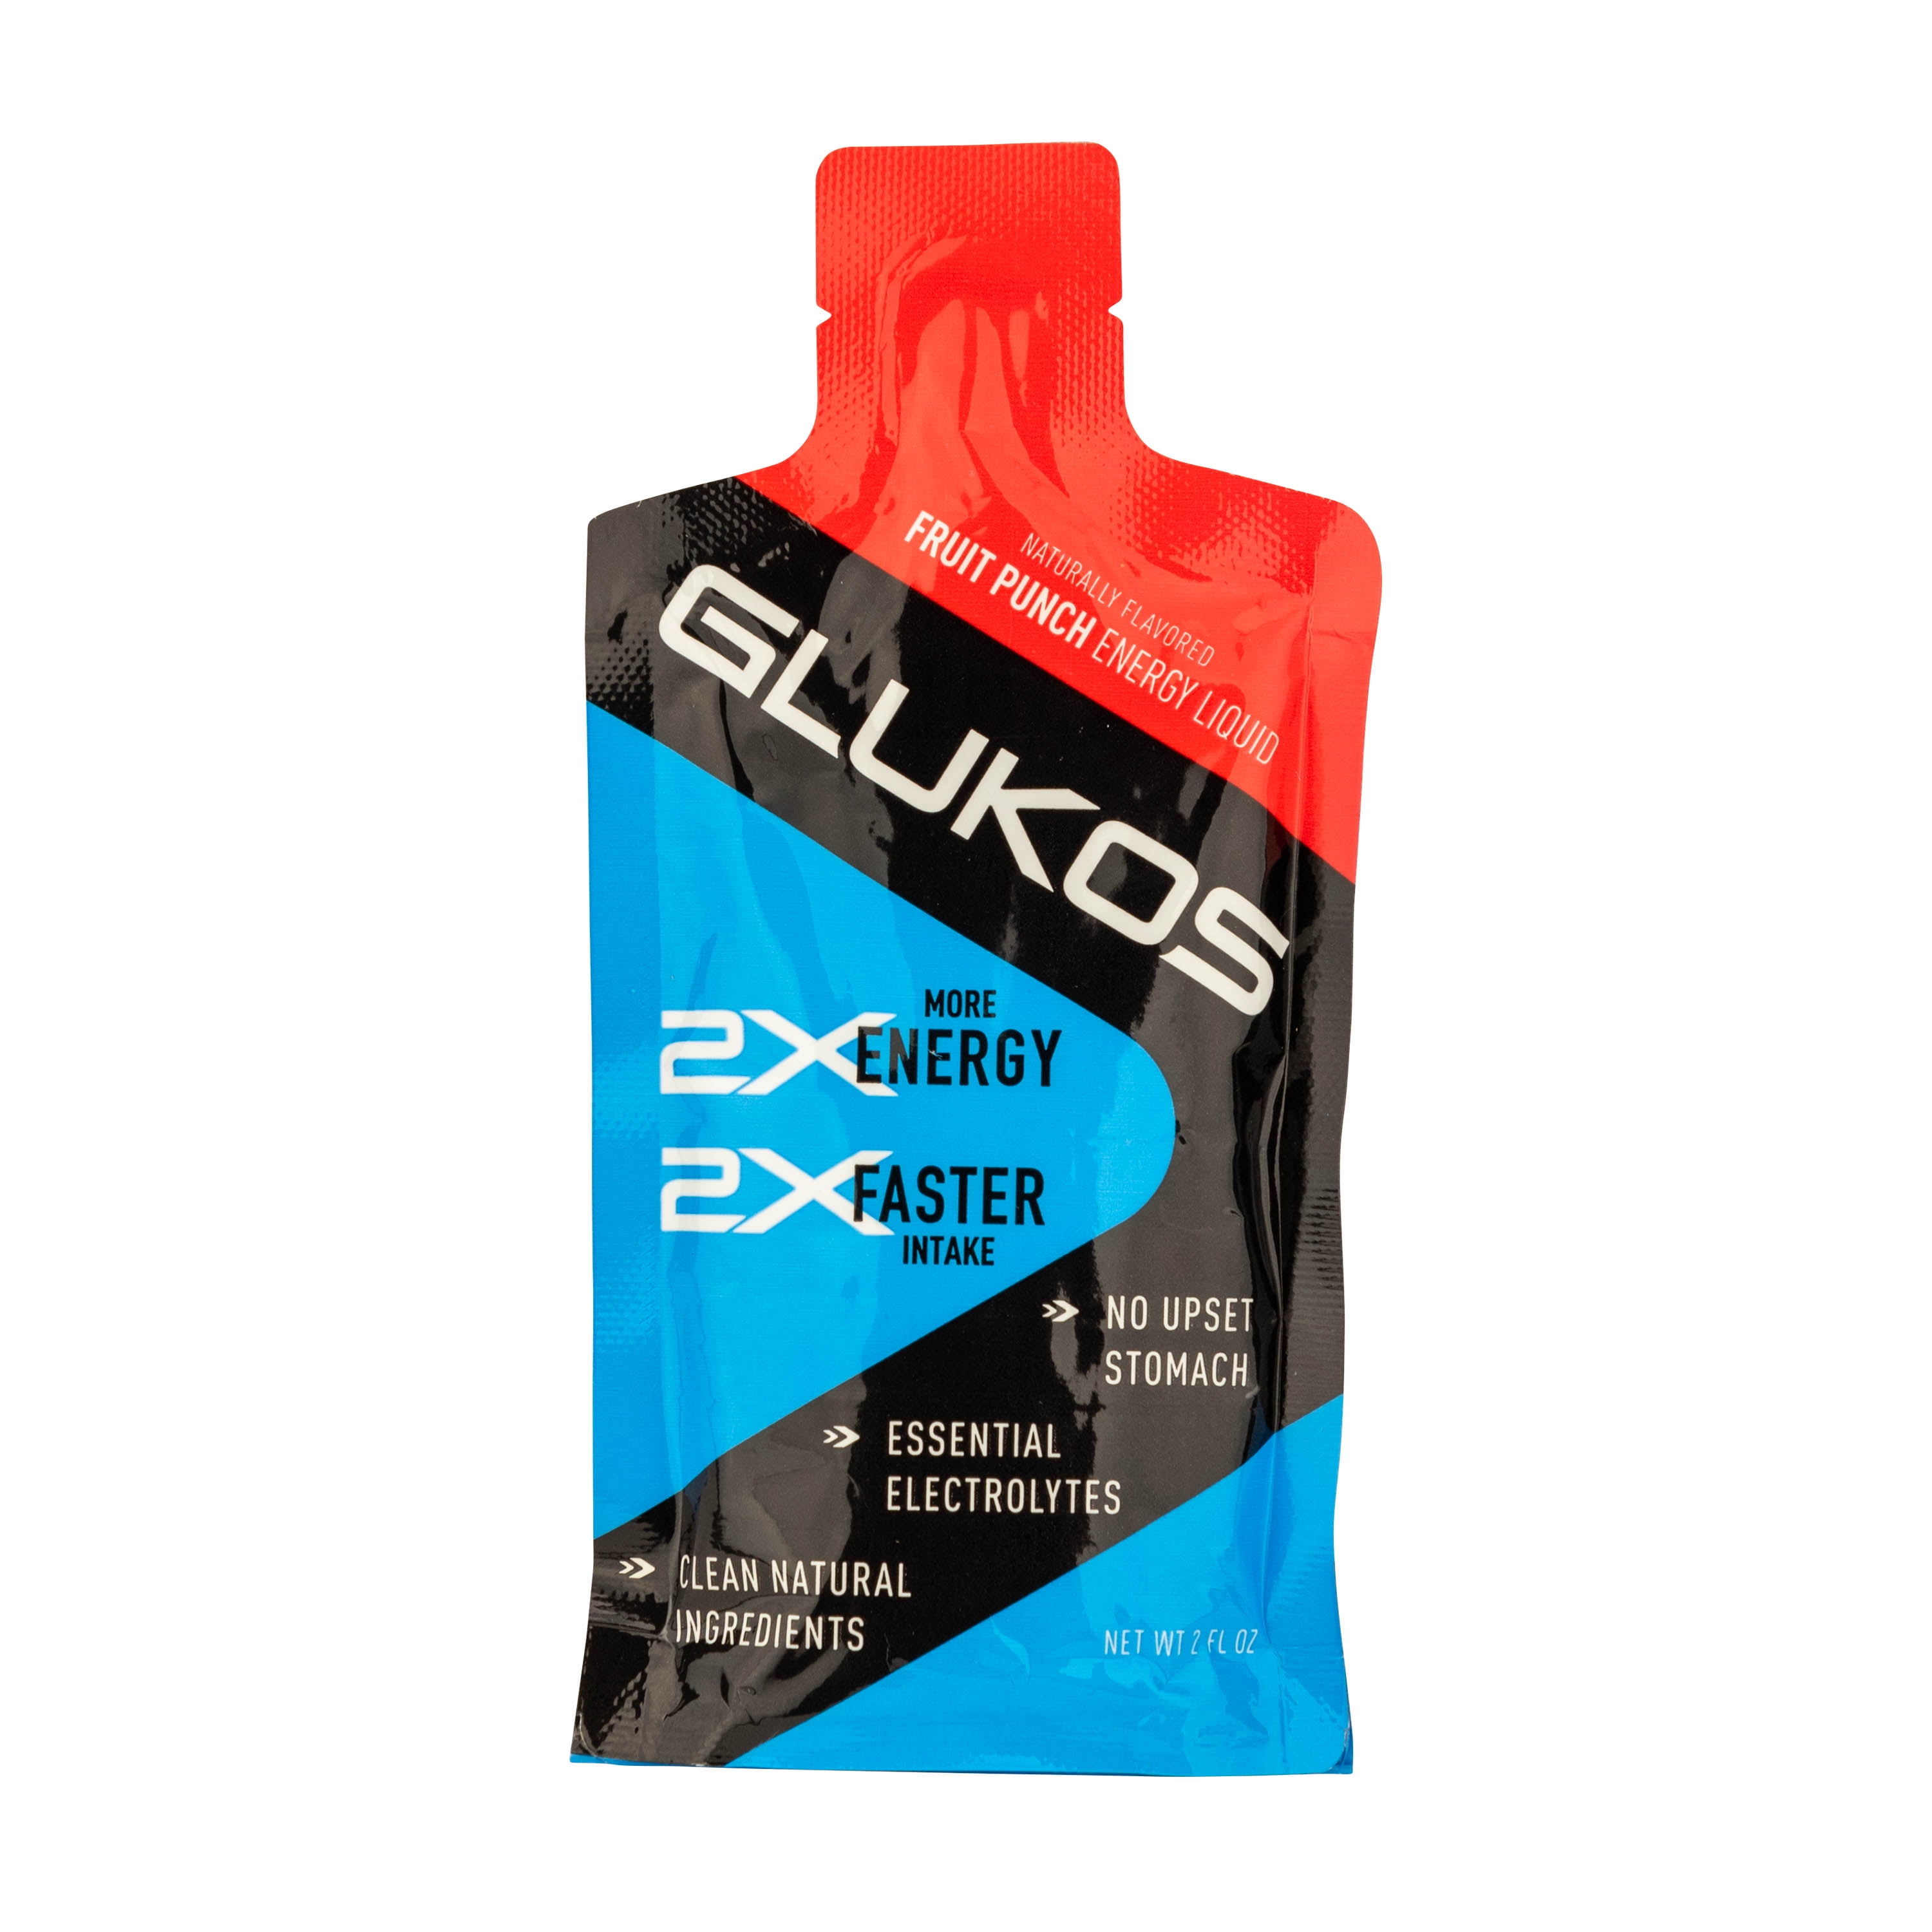 Glukos Energy Gel | Fruit Punch | 2 Ounces | Gluten-Free, Dairy-Free, Soy-Free and Vegan | For Exercise, Running and Performance | Sports Nutrition for Home & Gym